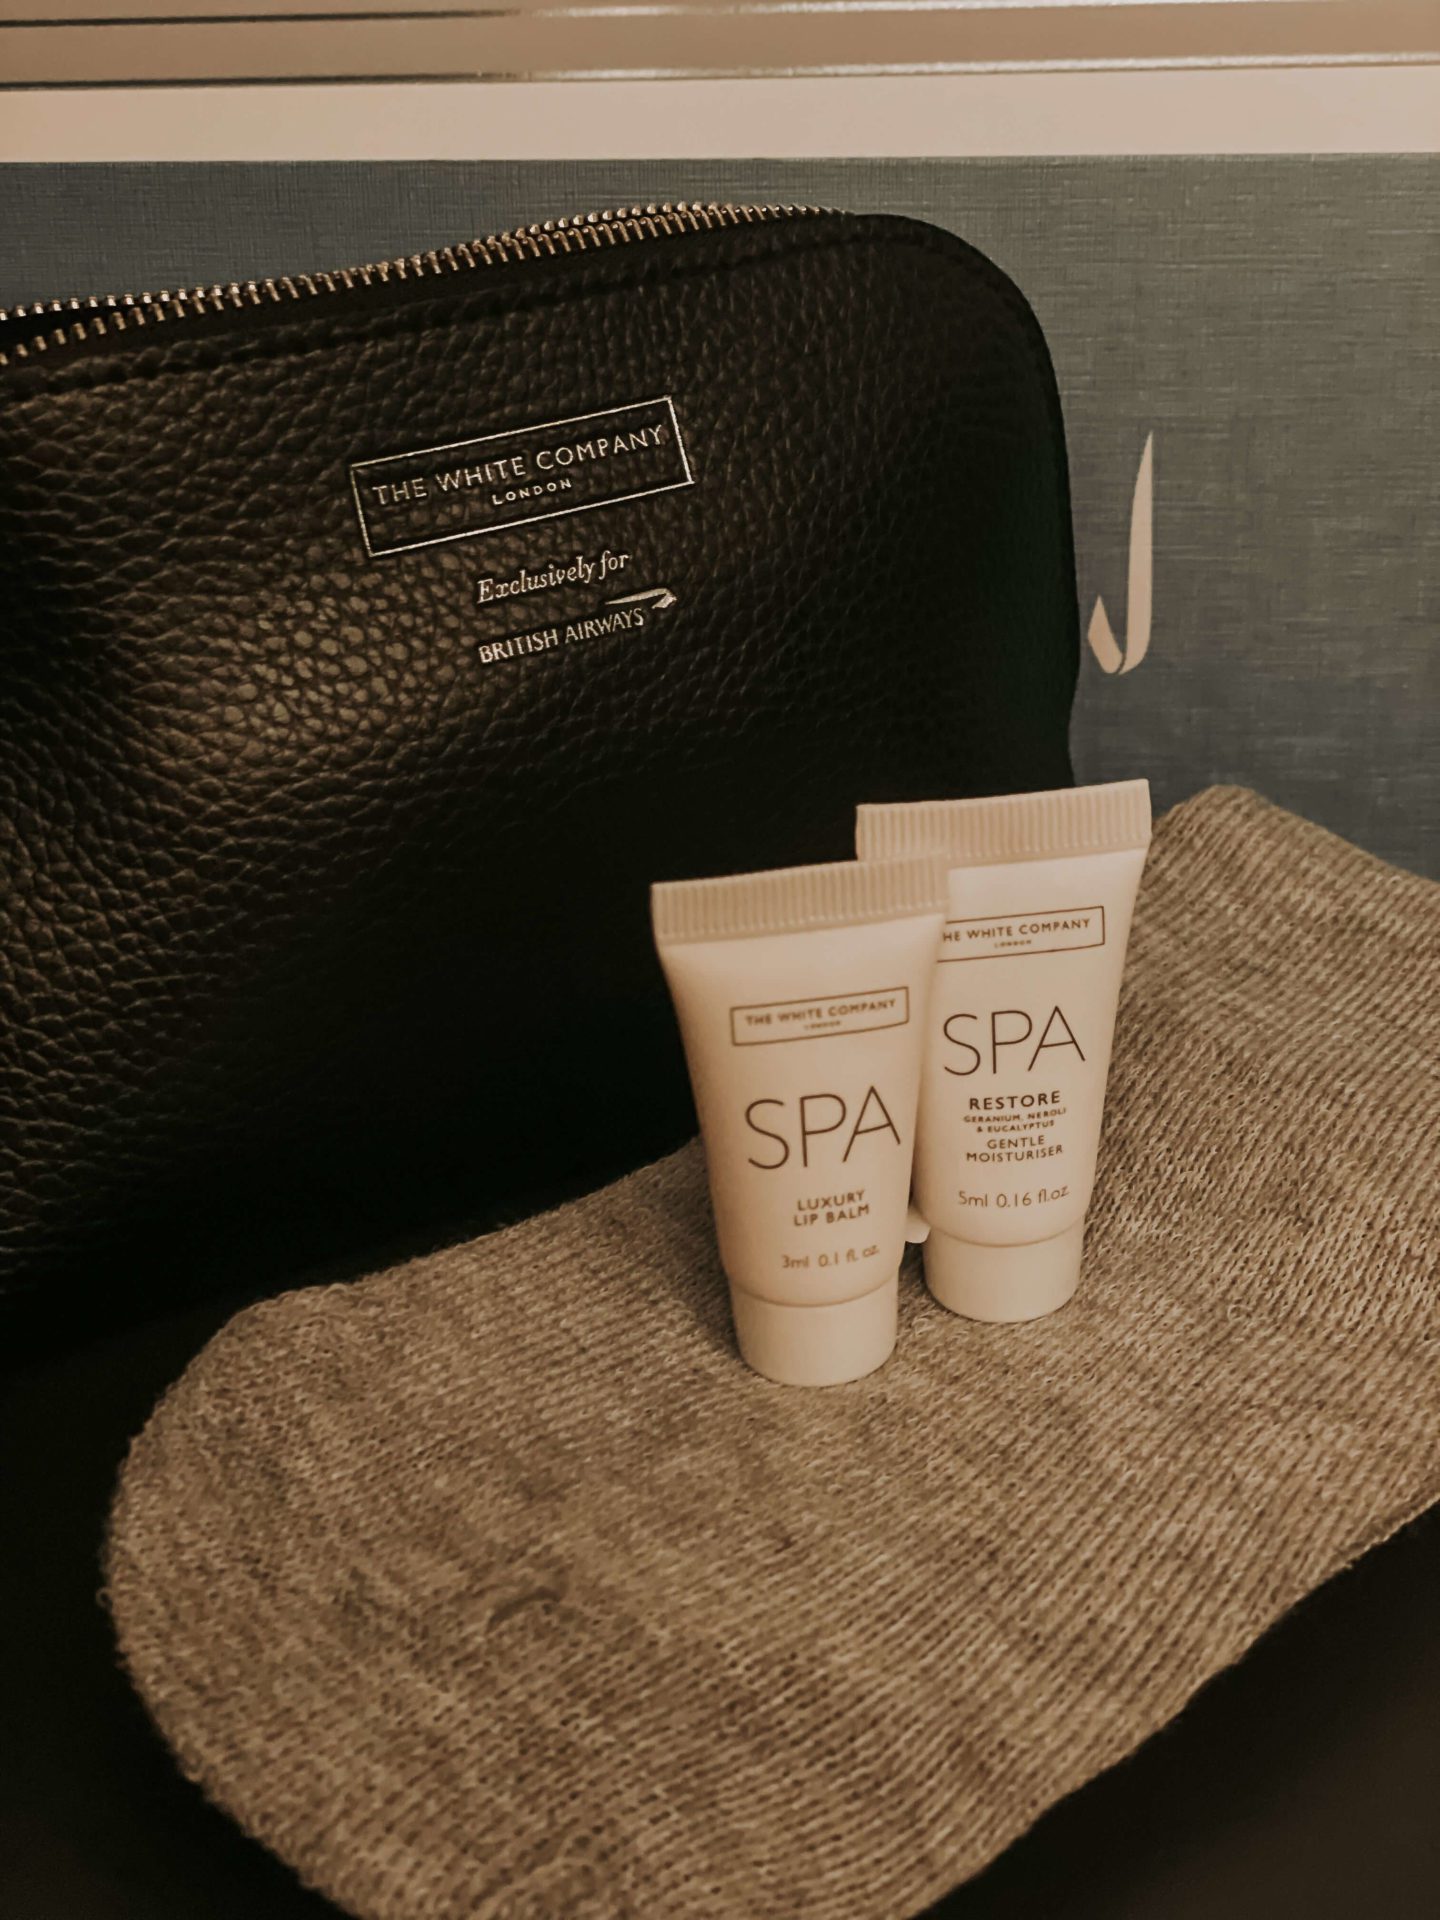 white company airline amenity kit